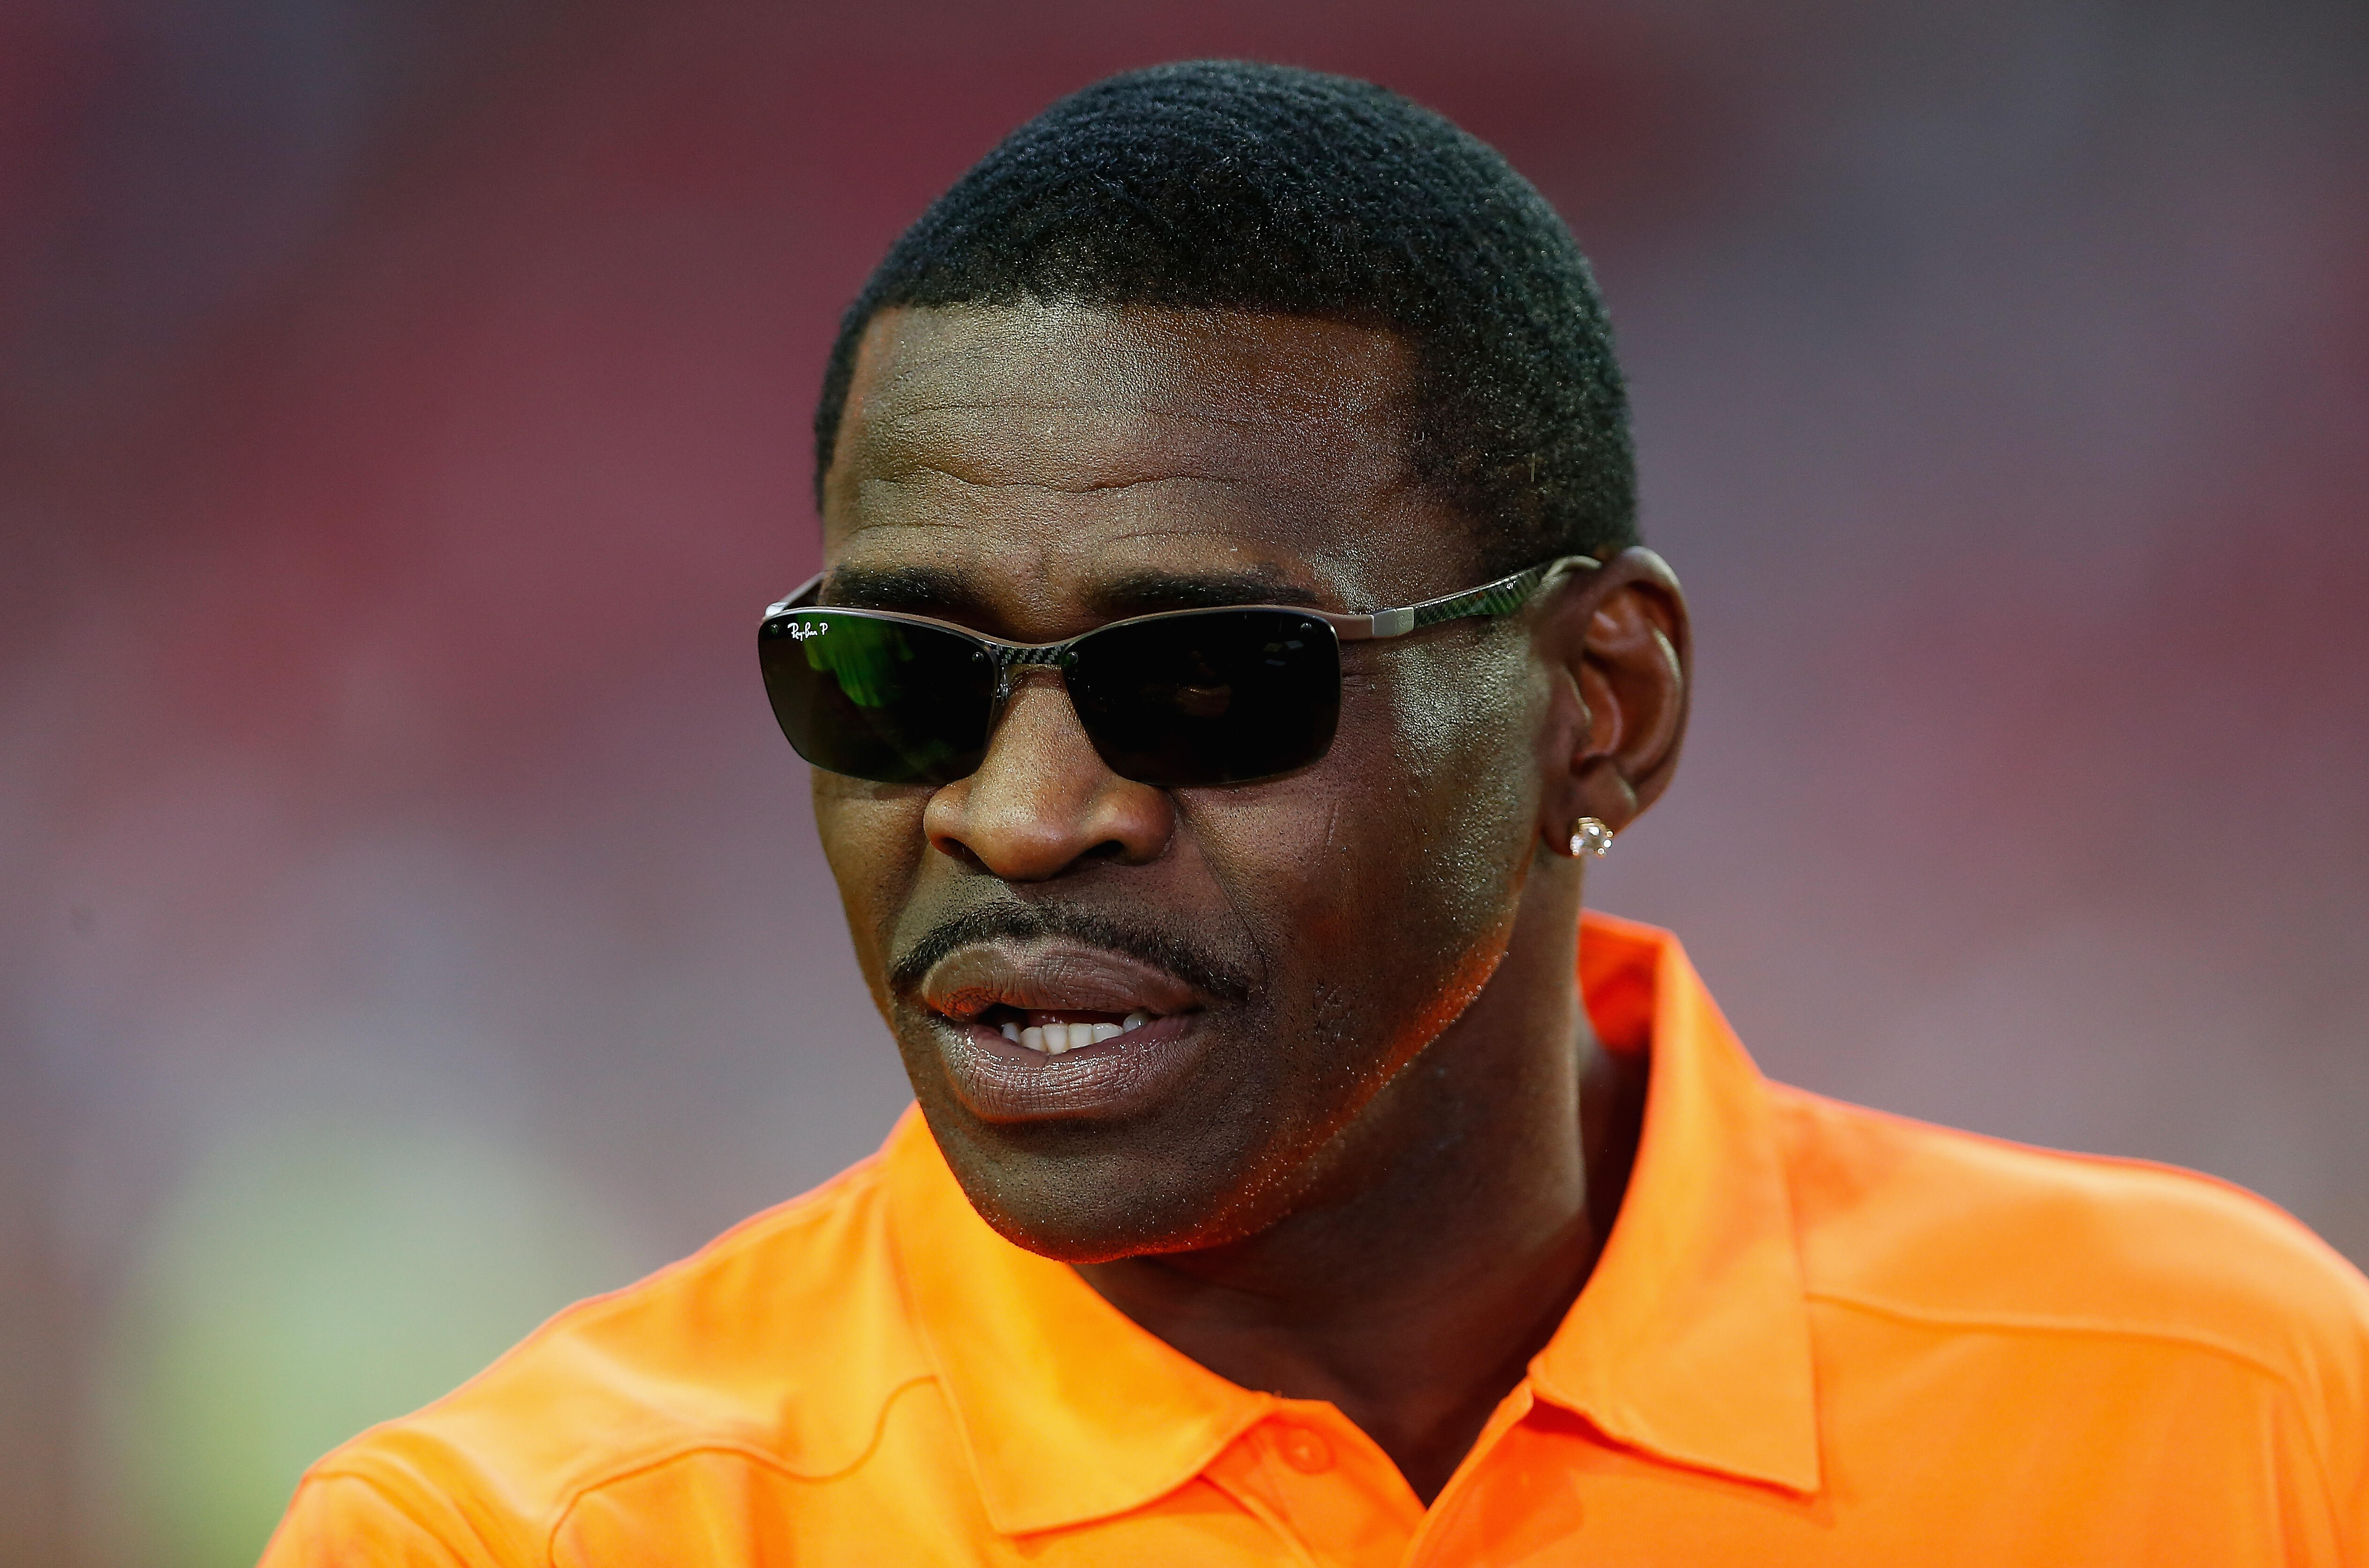 GLENDALE, AZ - JANUARY 25: Pro Bowl alumni captain Michael Irvin stands on the sidelines before the 2015 Pro Bowl at University of Phoenix Stadium on January 25, 2015 in Glendale, Arizona.  (Photo by Christian Petersen/Getty Images)